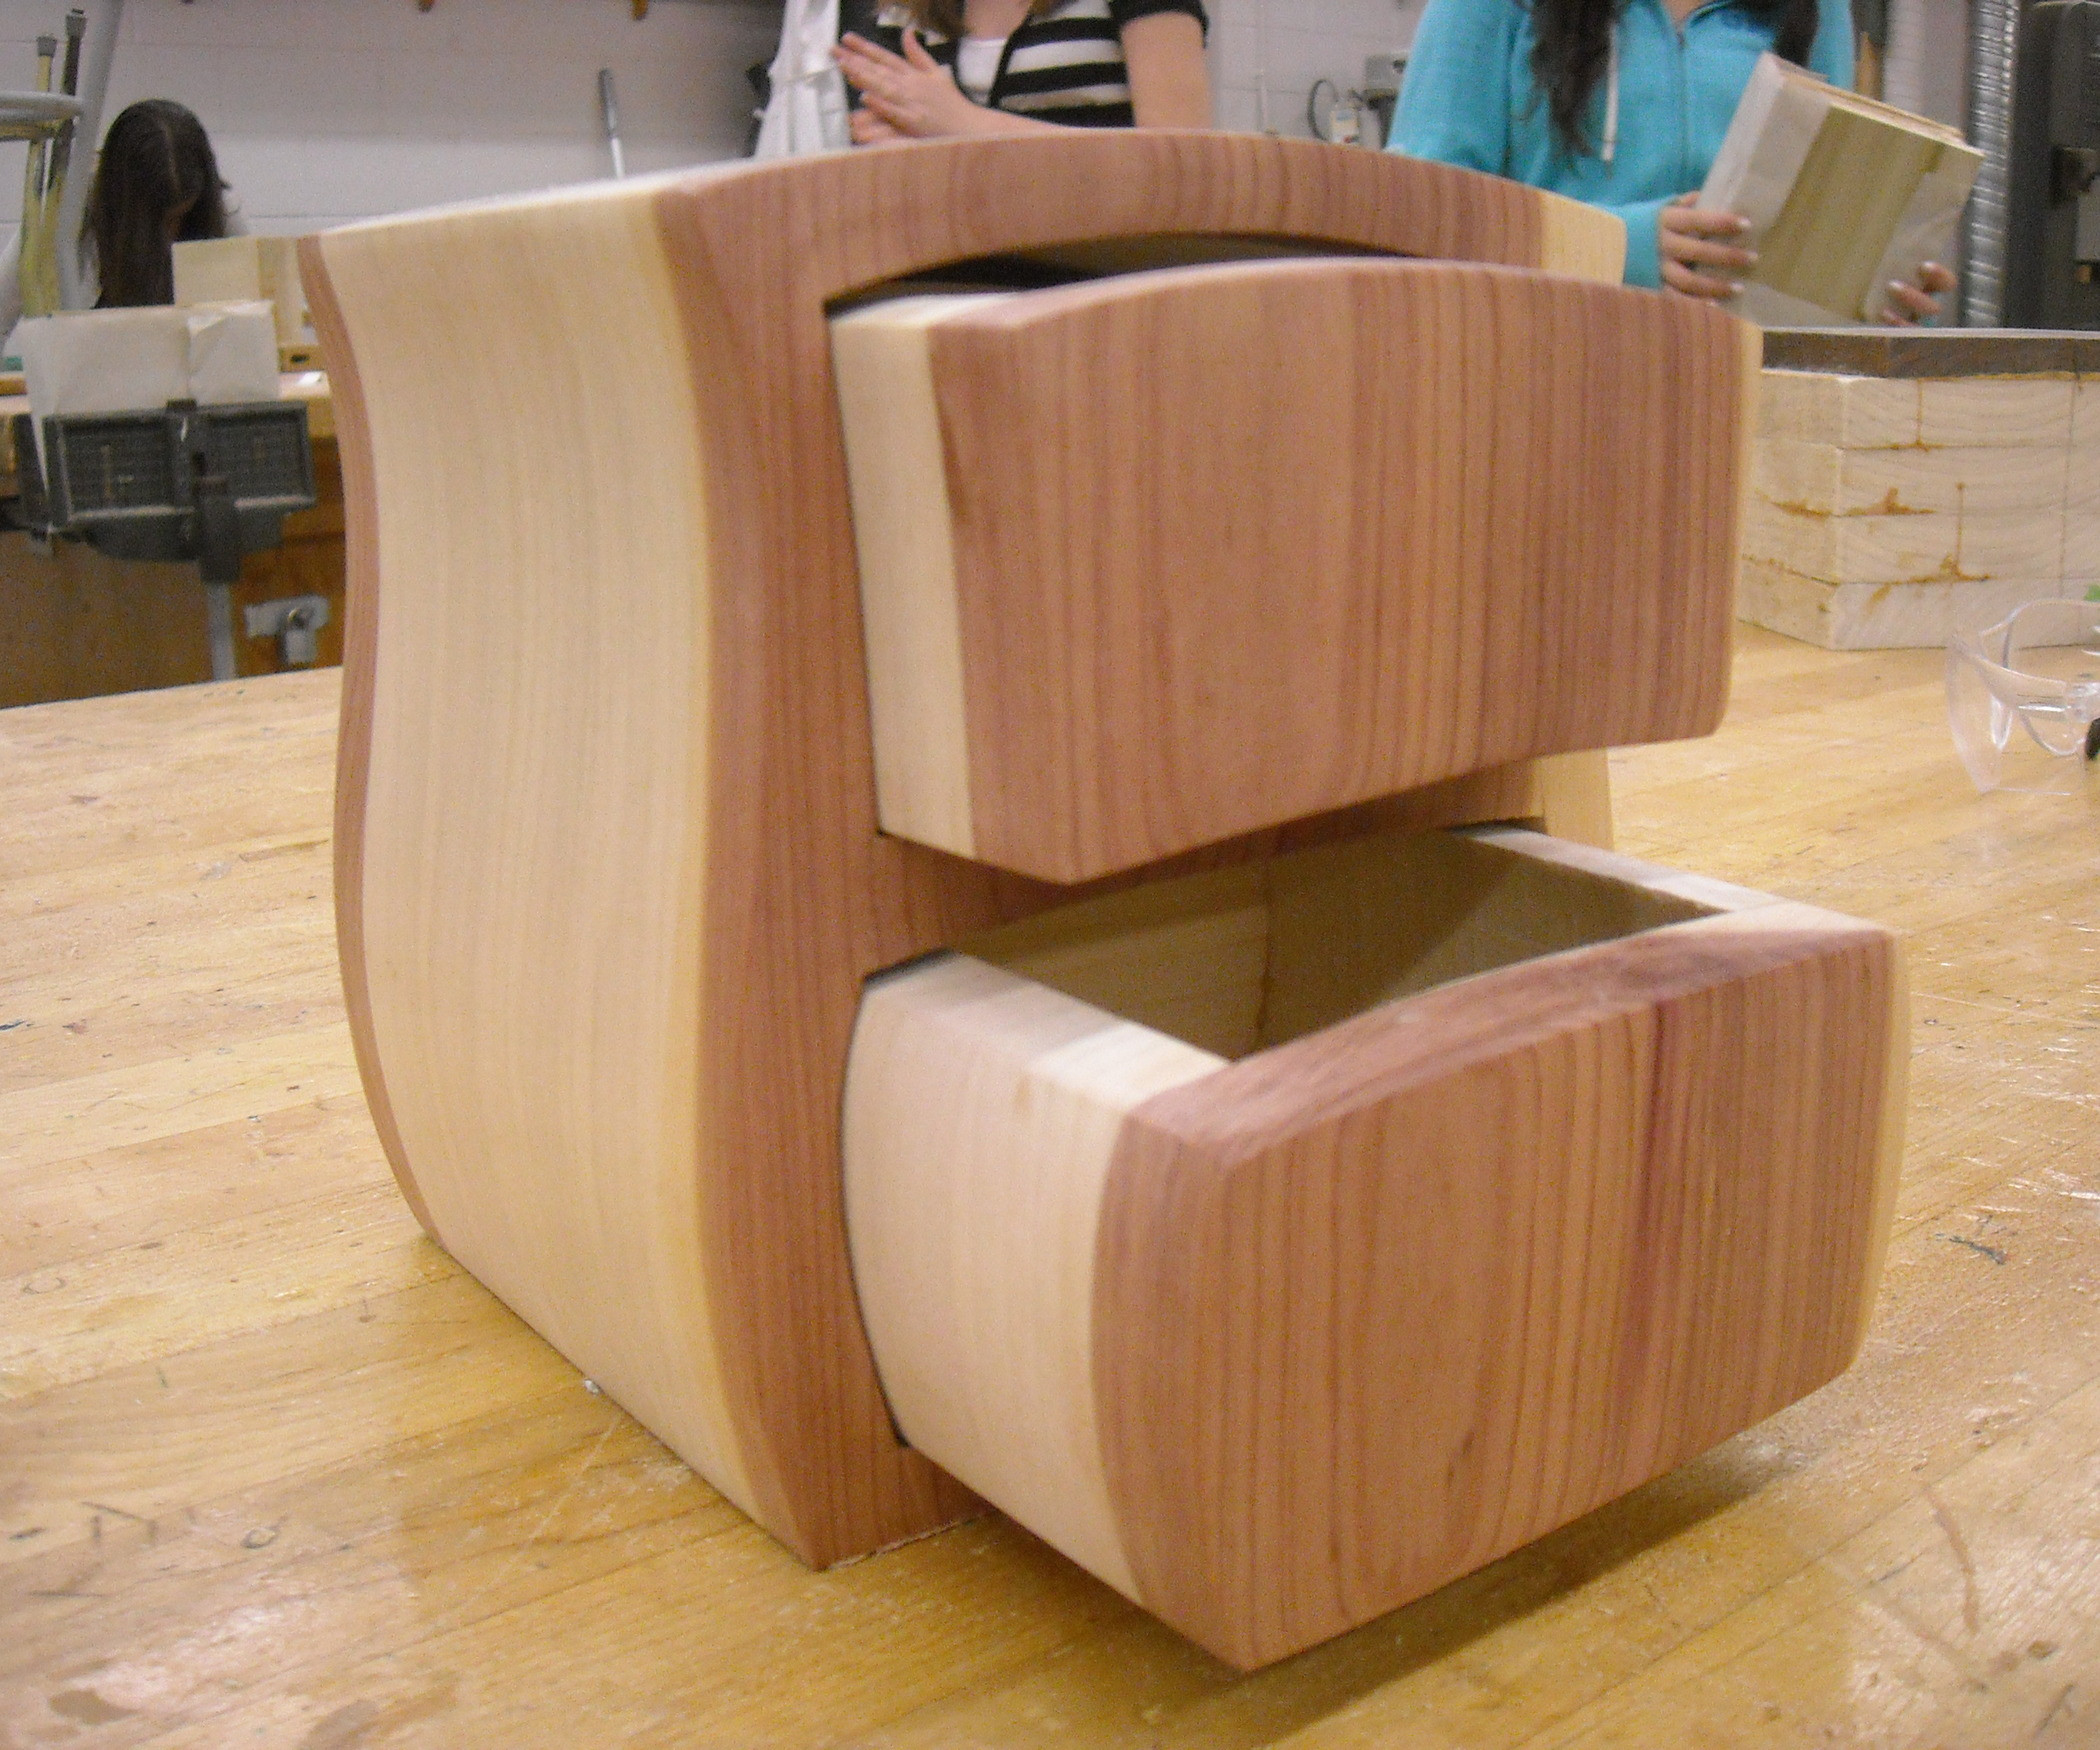 Best ideas about Wood Making Ideas
. Save or Pin A Bandsaw Box KIDS Can Make 9 Steps with Now.